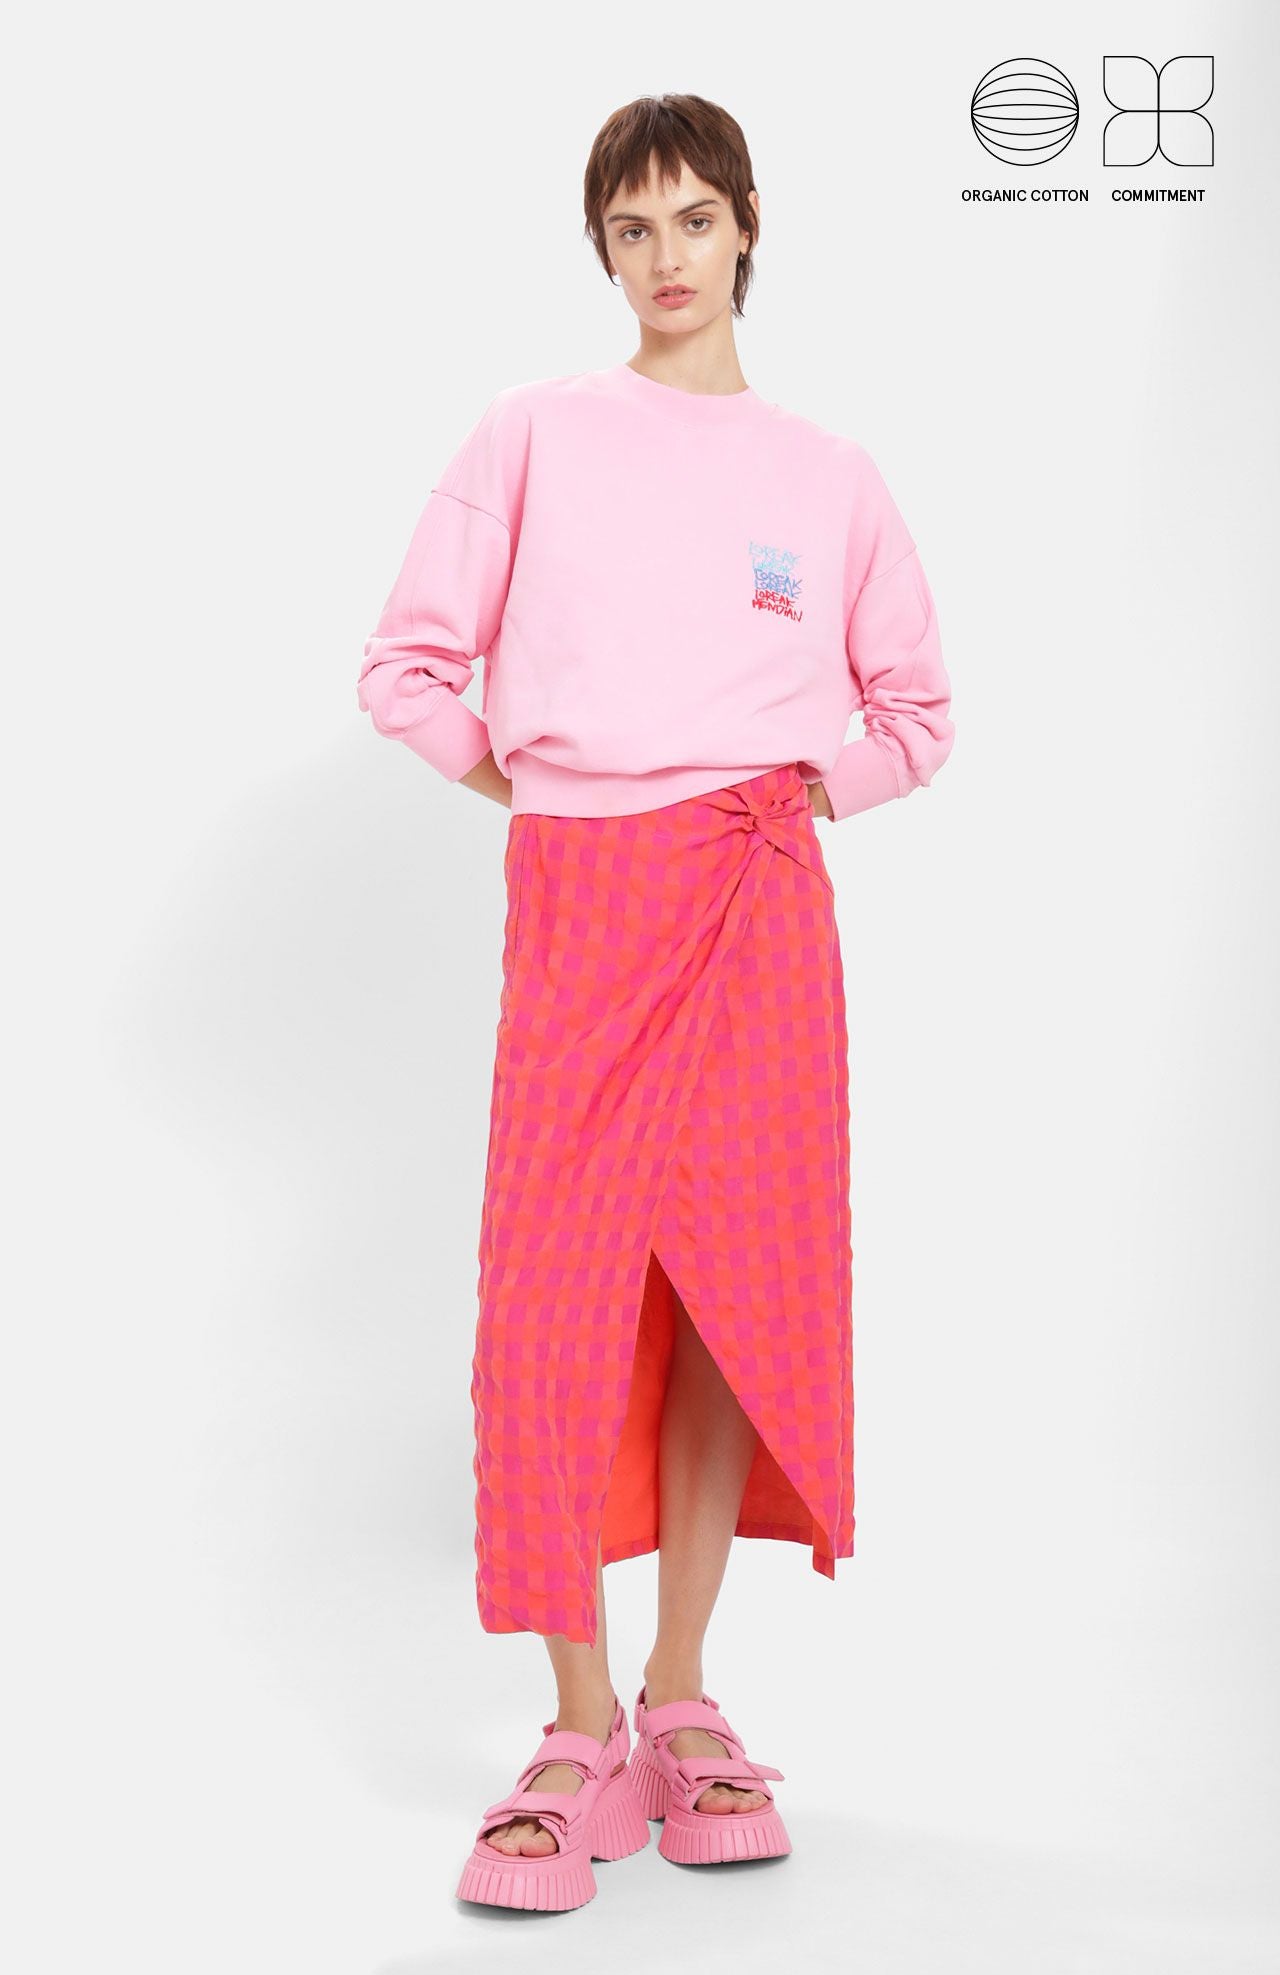 Pink relaxed fit crewneck sweatshirt with logo on right side chest